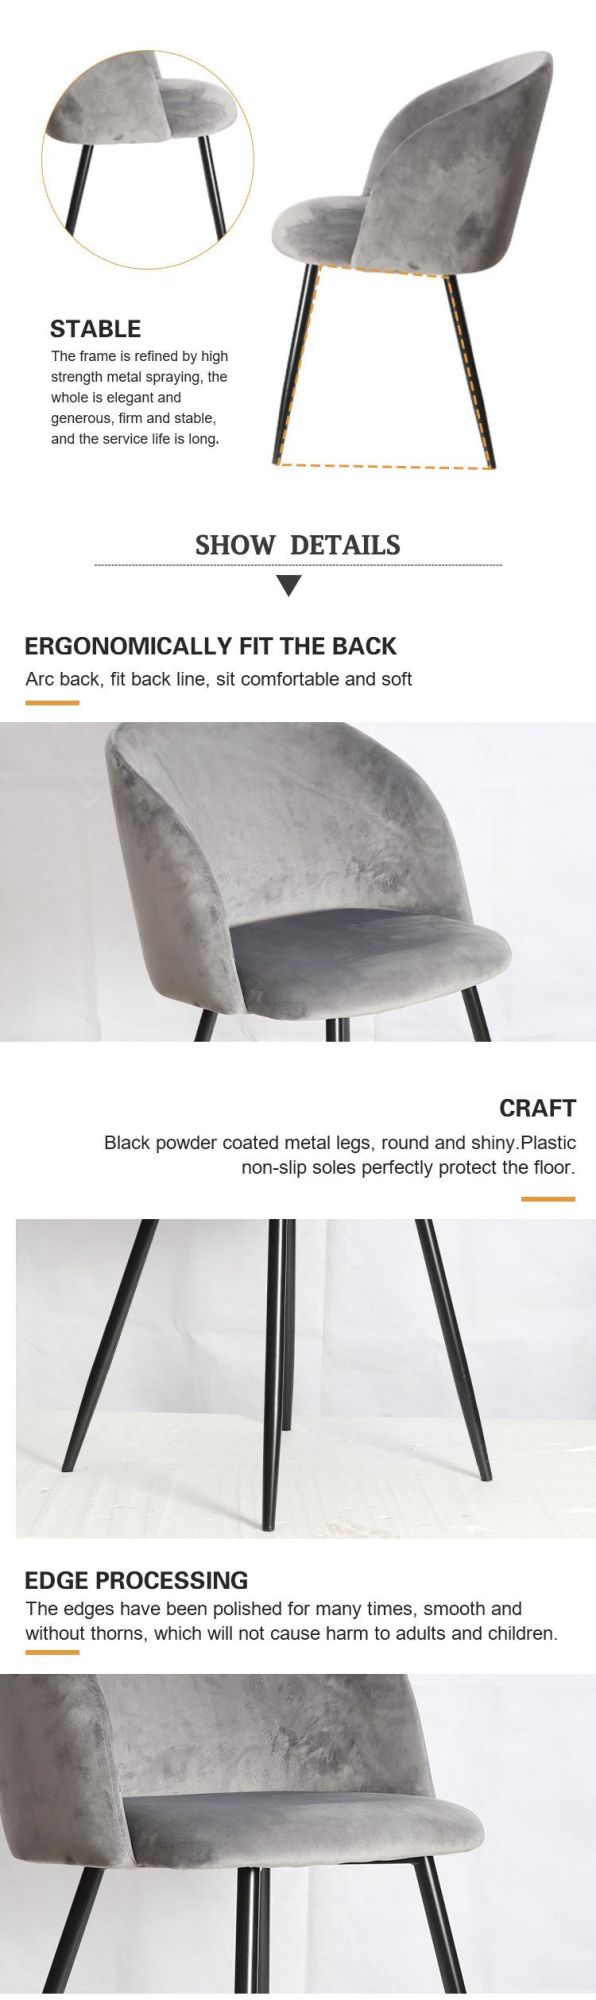 Fabric and Metal Tube Dinner Chair for Restaurant Use